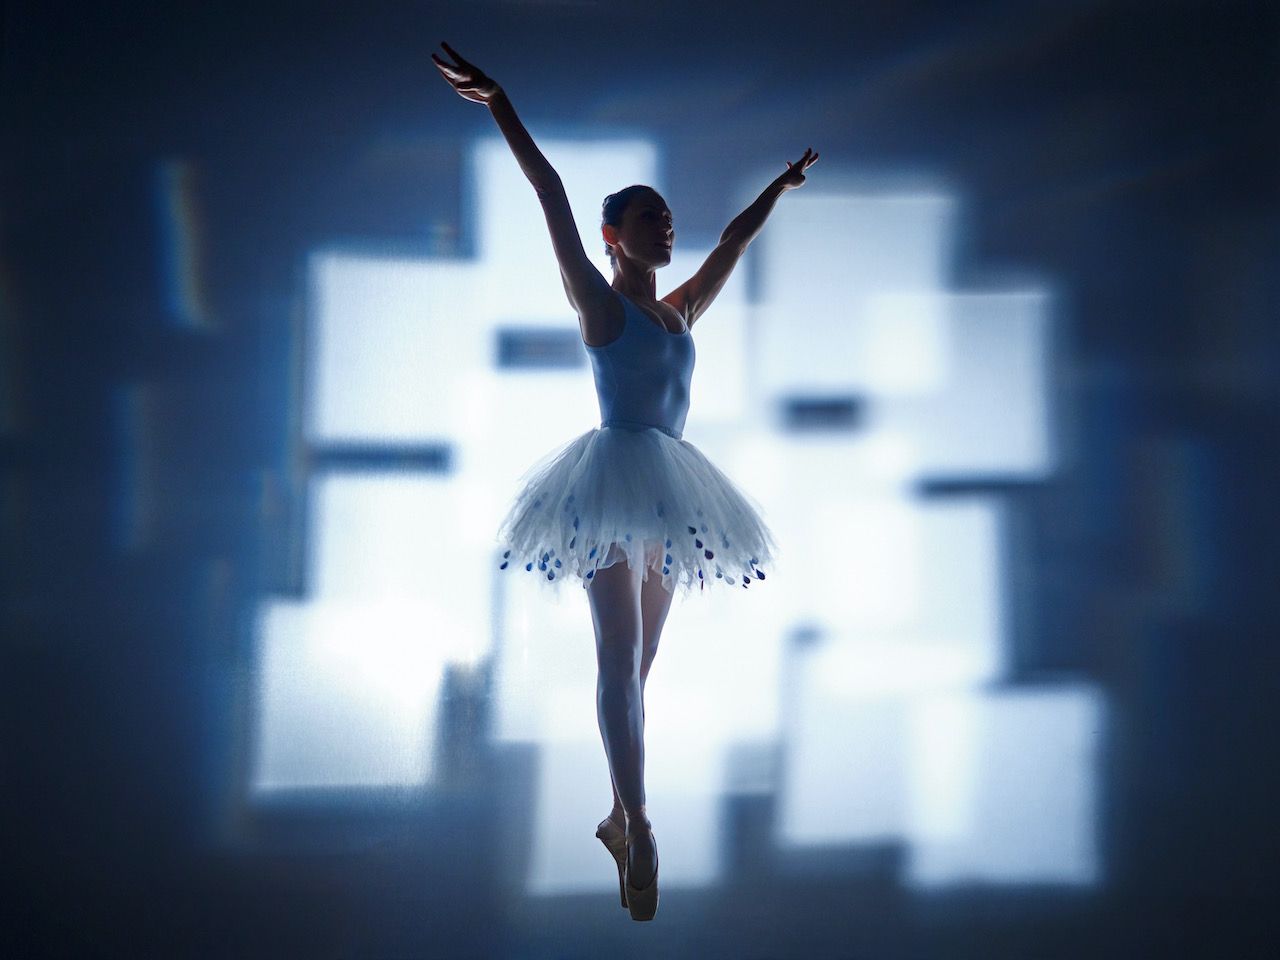 Michael Haegele abstract photography silhouette ballerina in tutu with luminous overlapping squares in the background